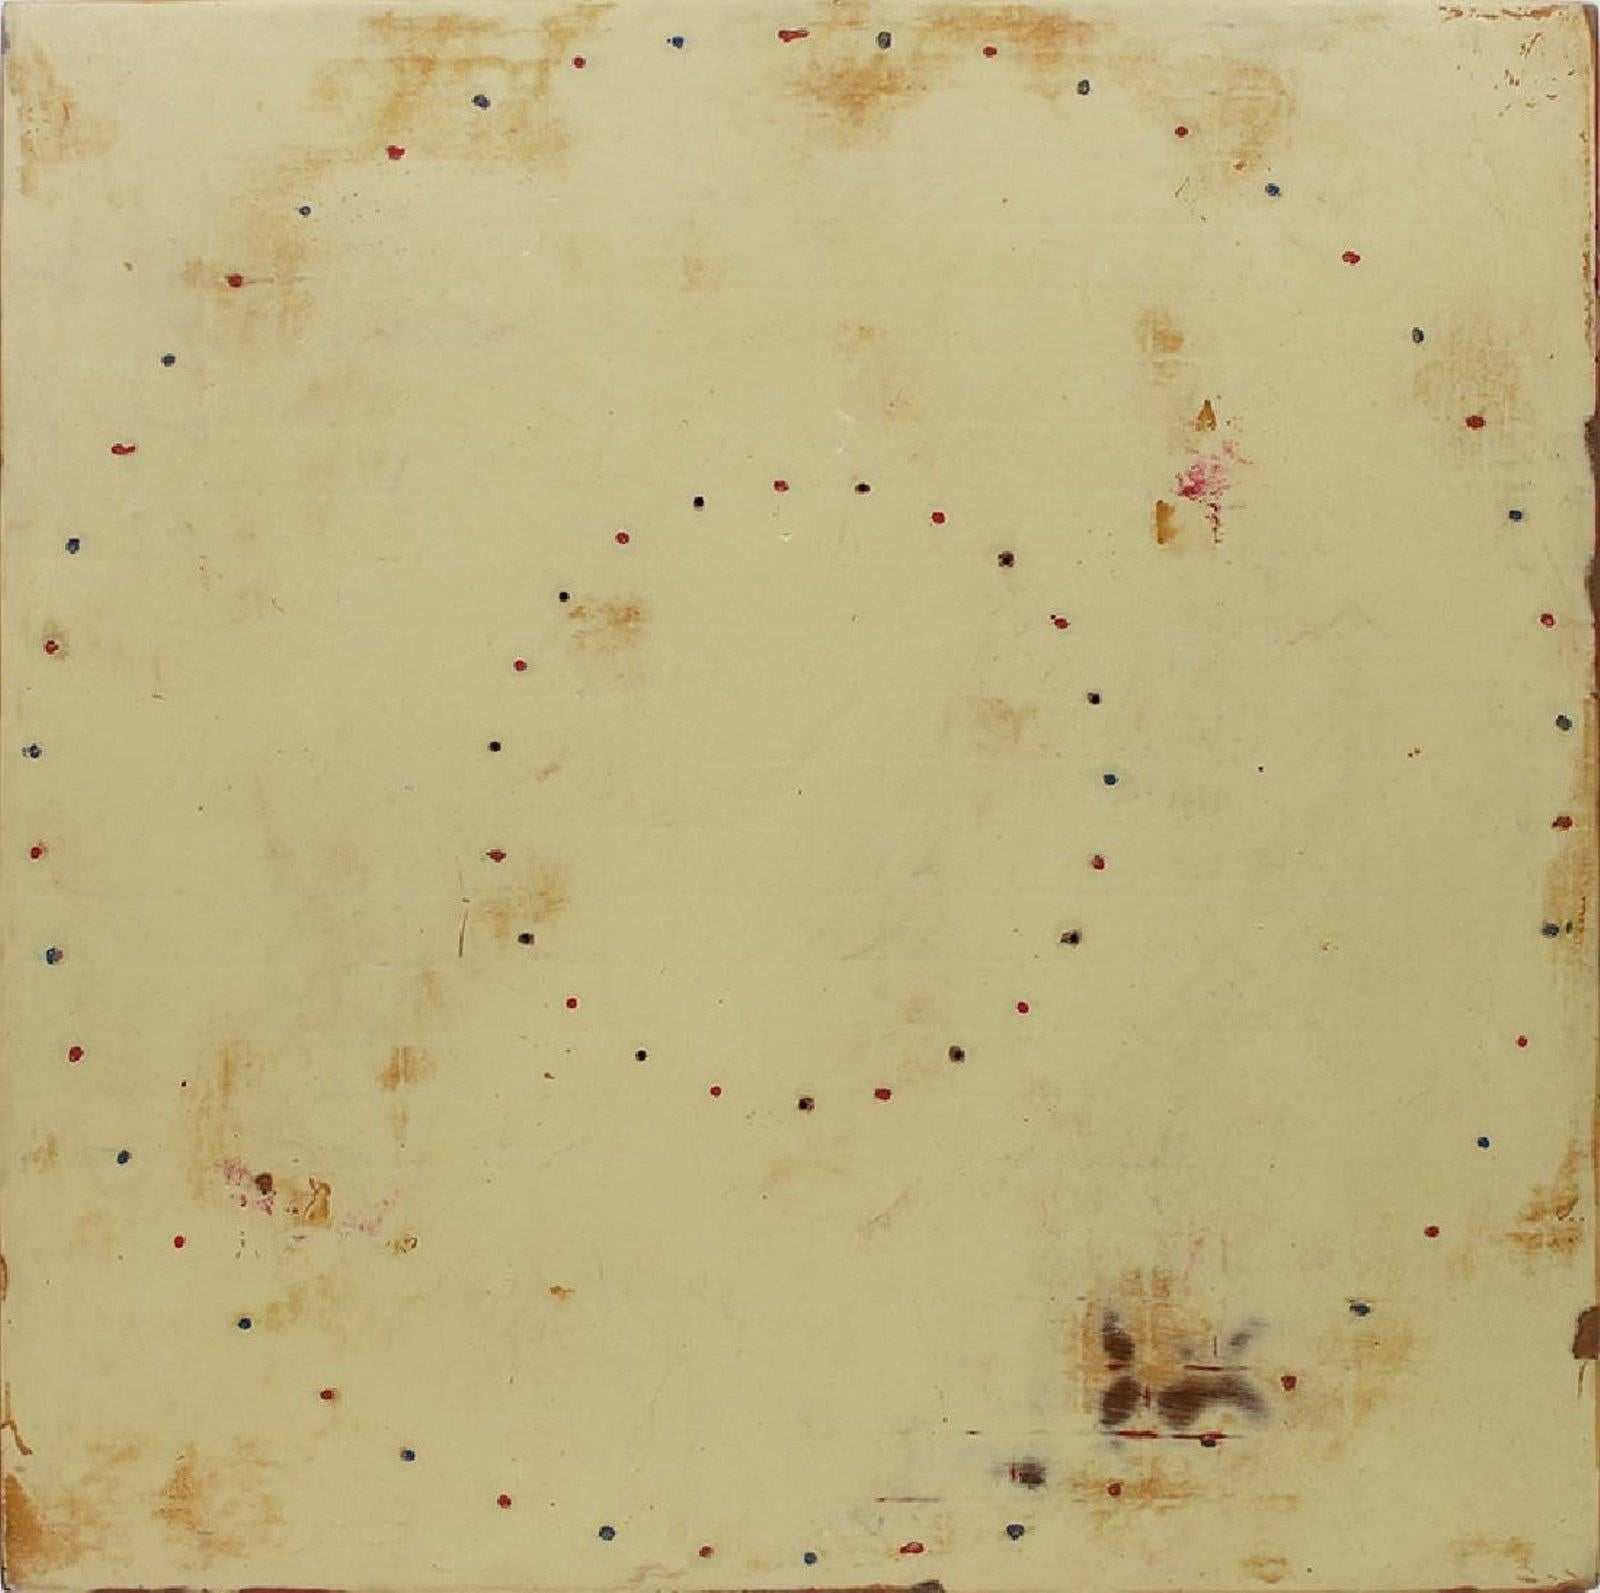 HALCYON RING SERIES, 1995, mixed media painting on wood, signed and dated and titled on verso, 24 x 24”, unidentified exhibition tag on verso, a few small nicks, line impressions upper left, otherwise good studio condition.


Born in Los Angeles,